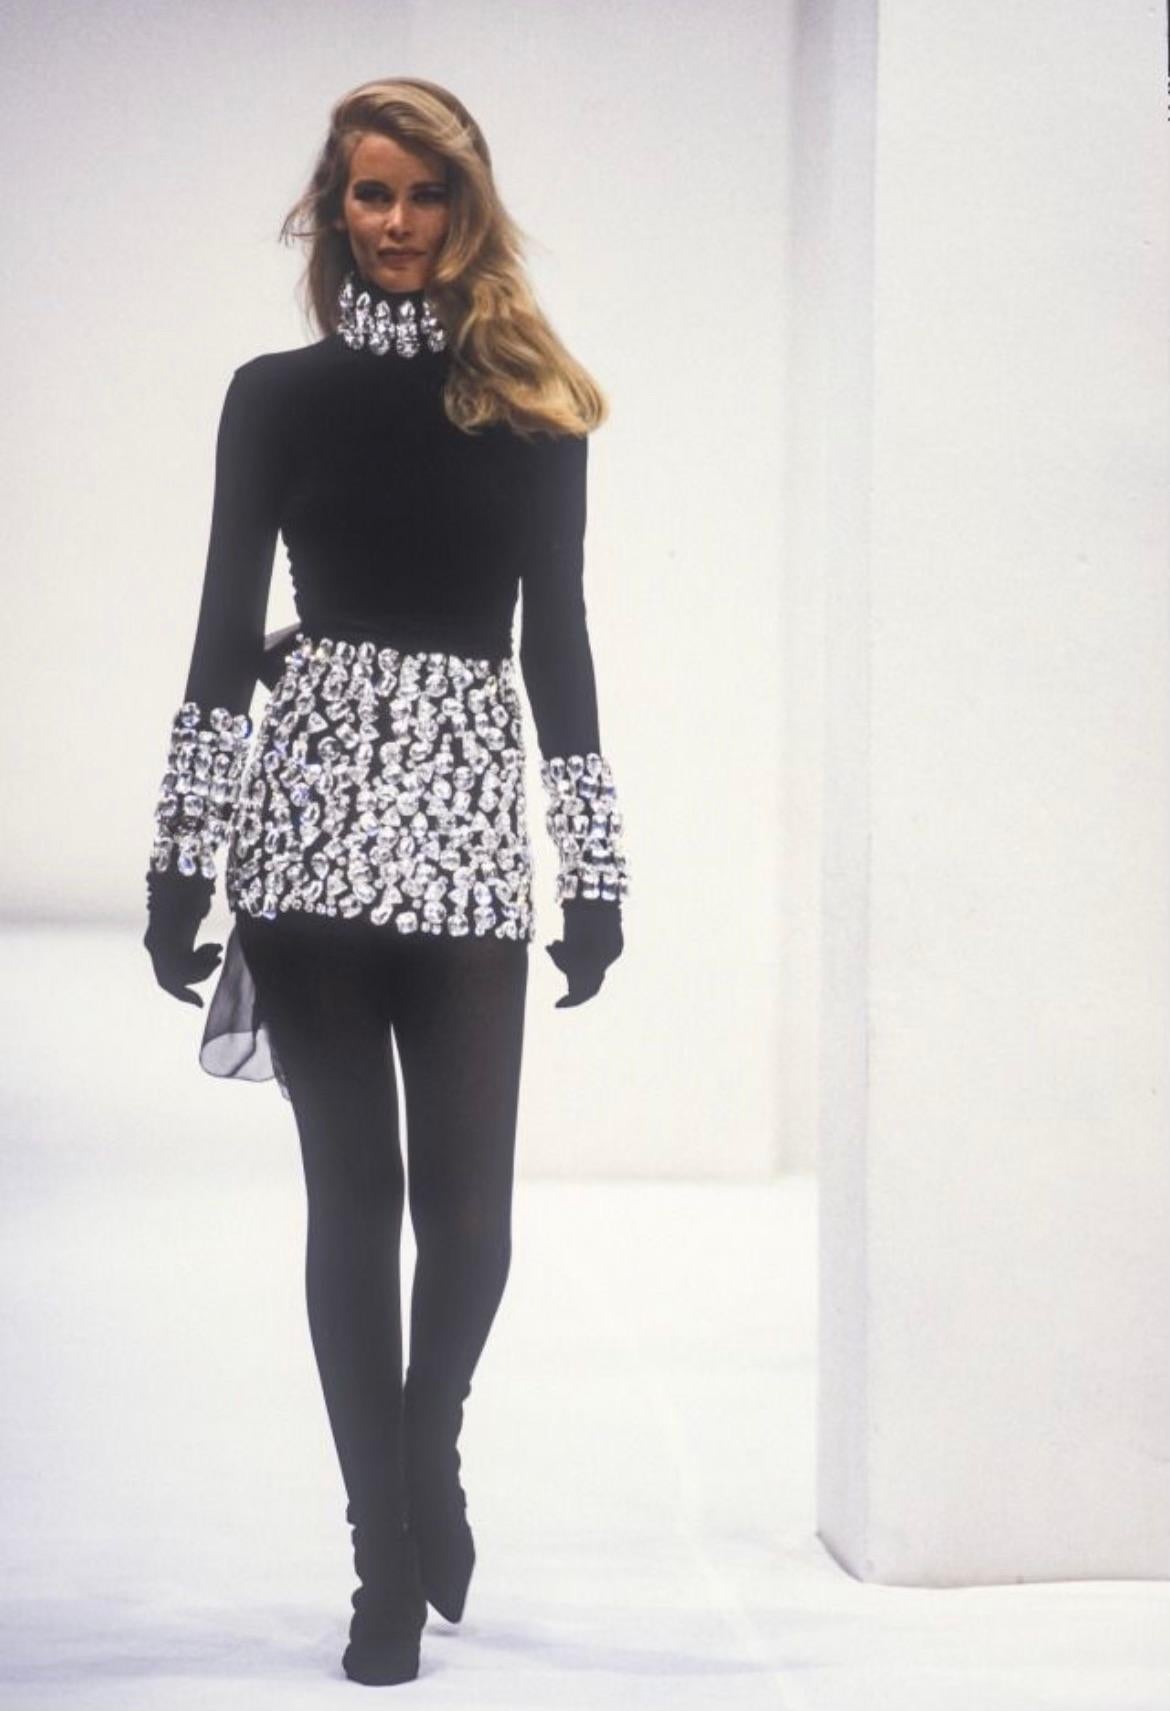 Presenting an incredible black gem accented Dolce and Gabbana cropped turtleneck. From the Fall/Winter 1991 collection, a similar top debuted on the season's runway, modeled by Claudia Schiffer.  A nearly identical top was also highlighted in a 1991